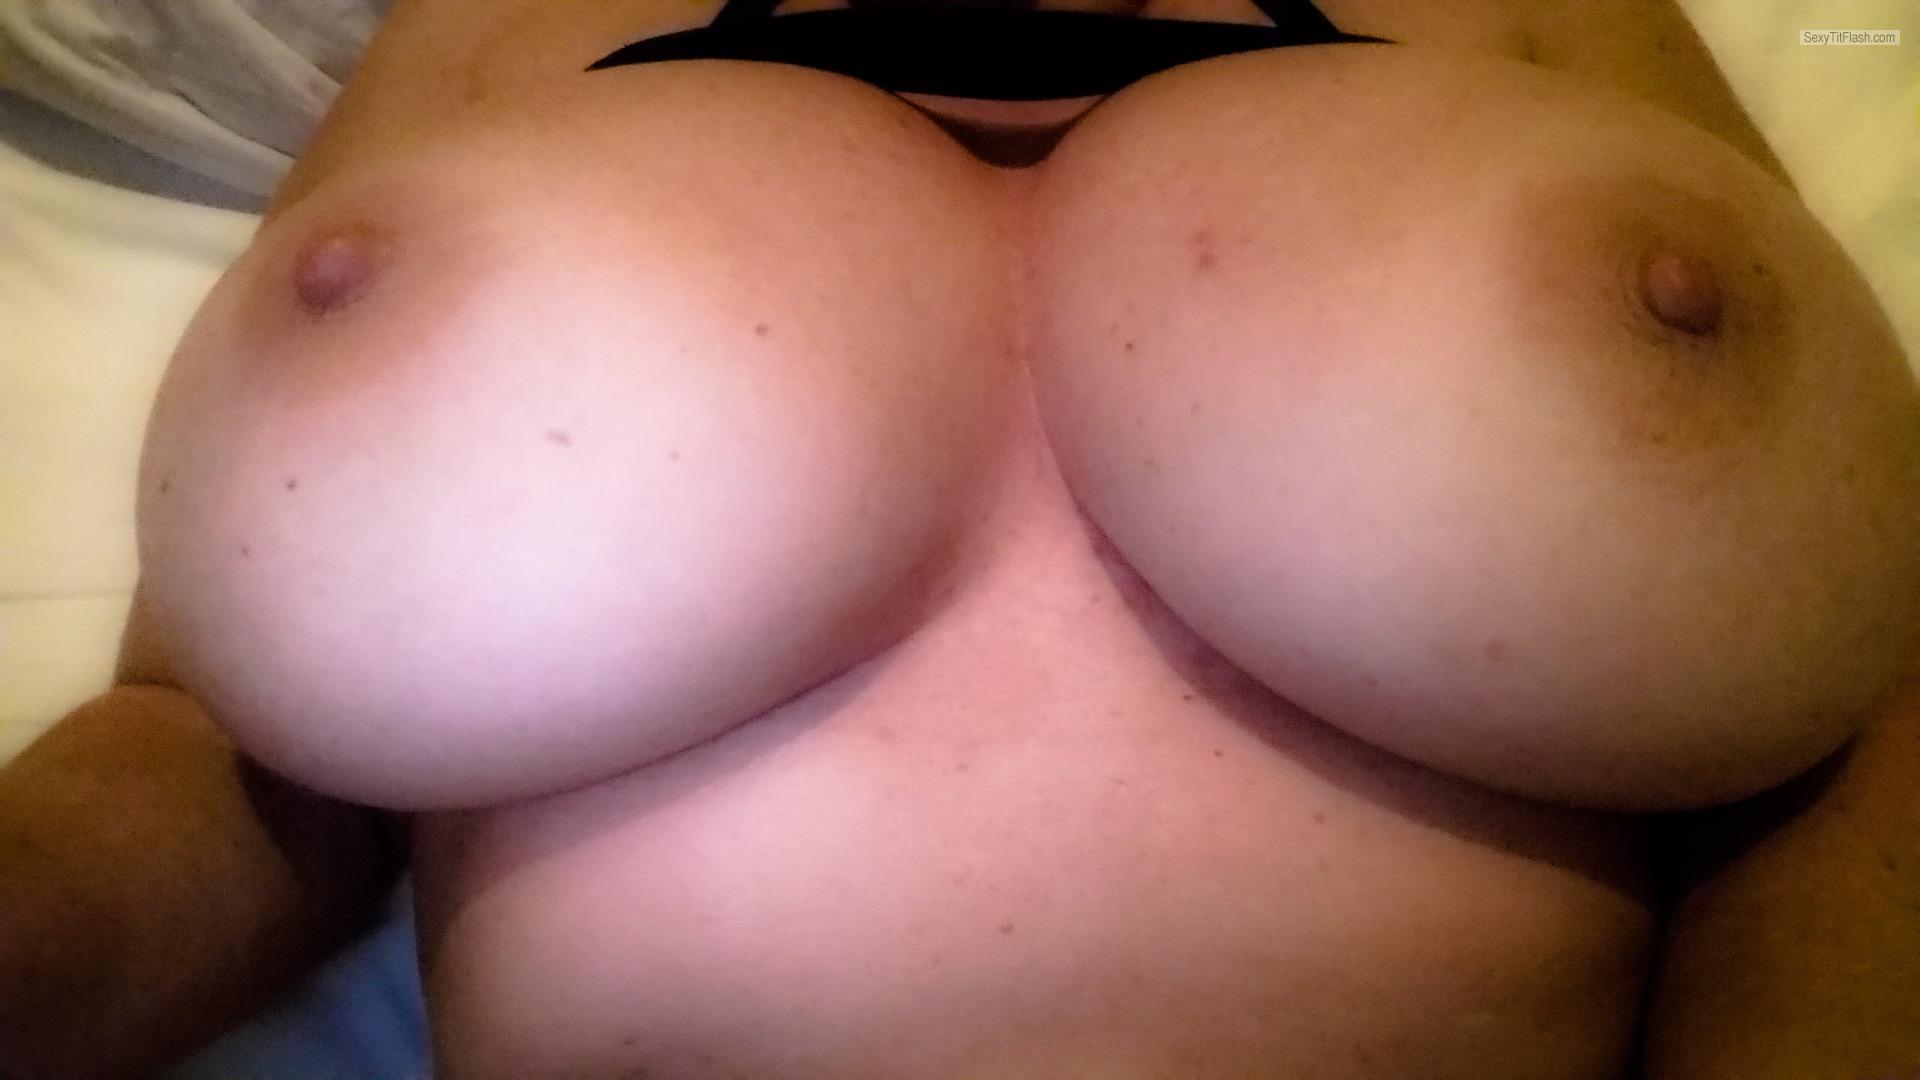 Tit Flash: My Extremely Big Tits (Selfie) - Corpus81 from United States